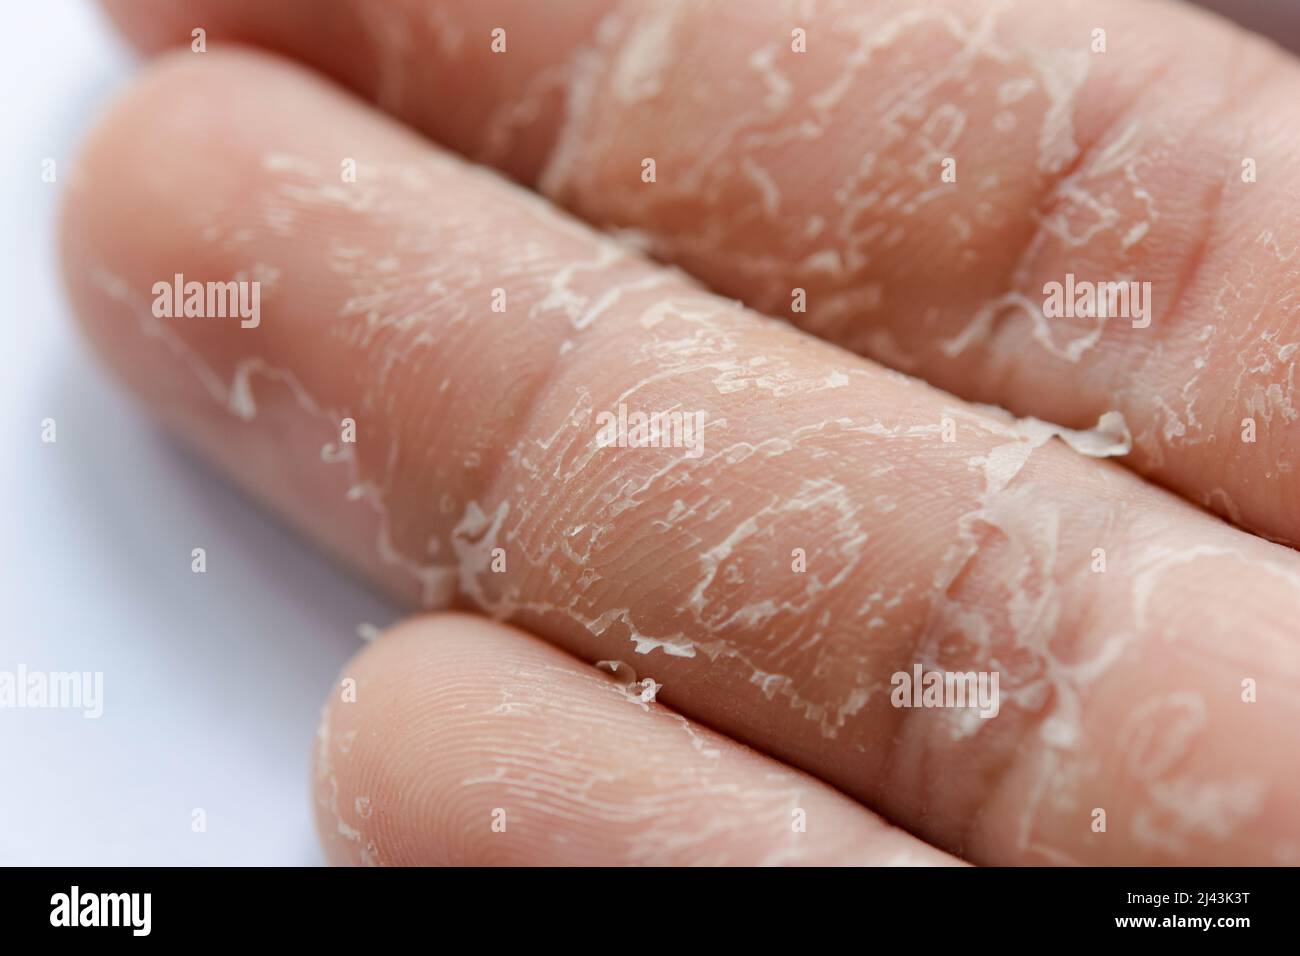 Peeling Skin on Hands: 12 Causes and Treatment Options